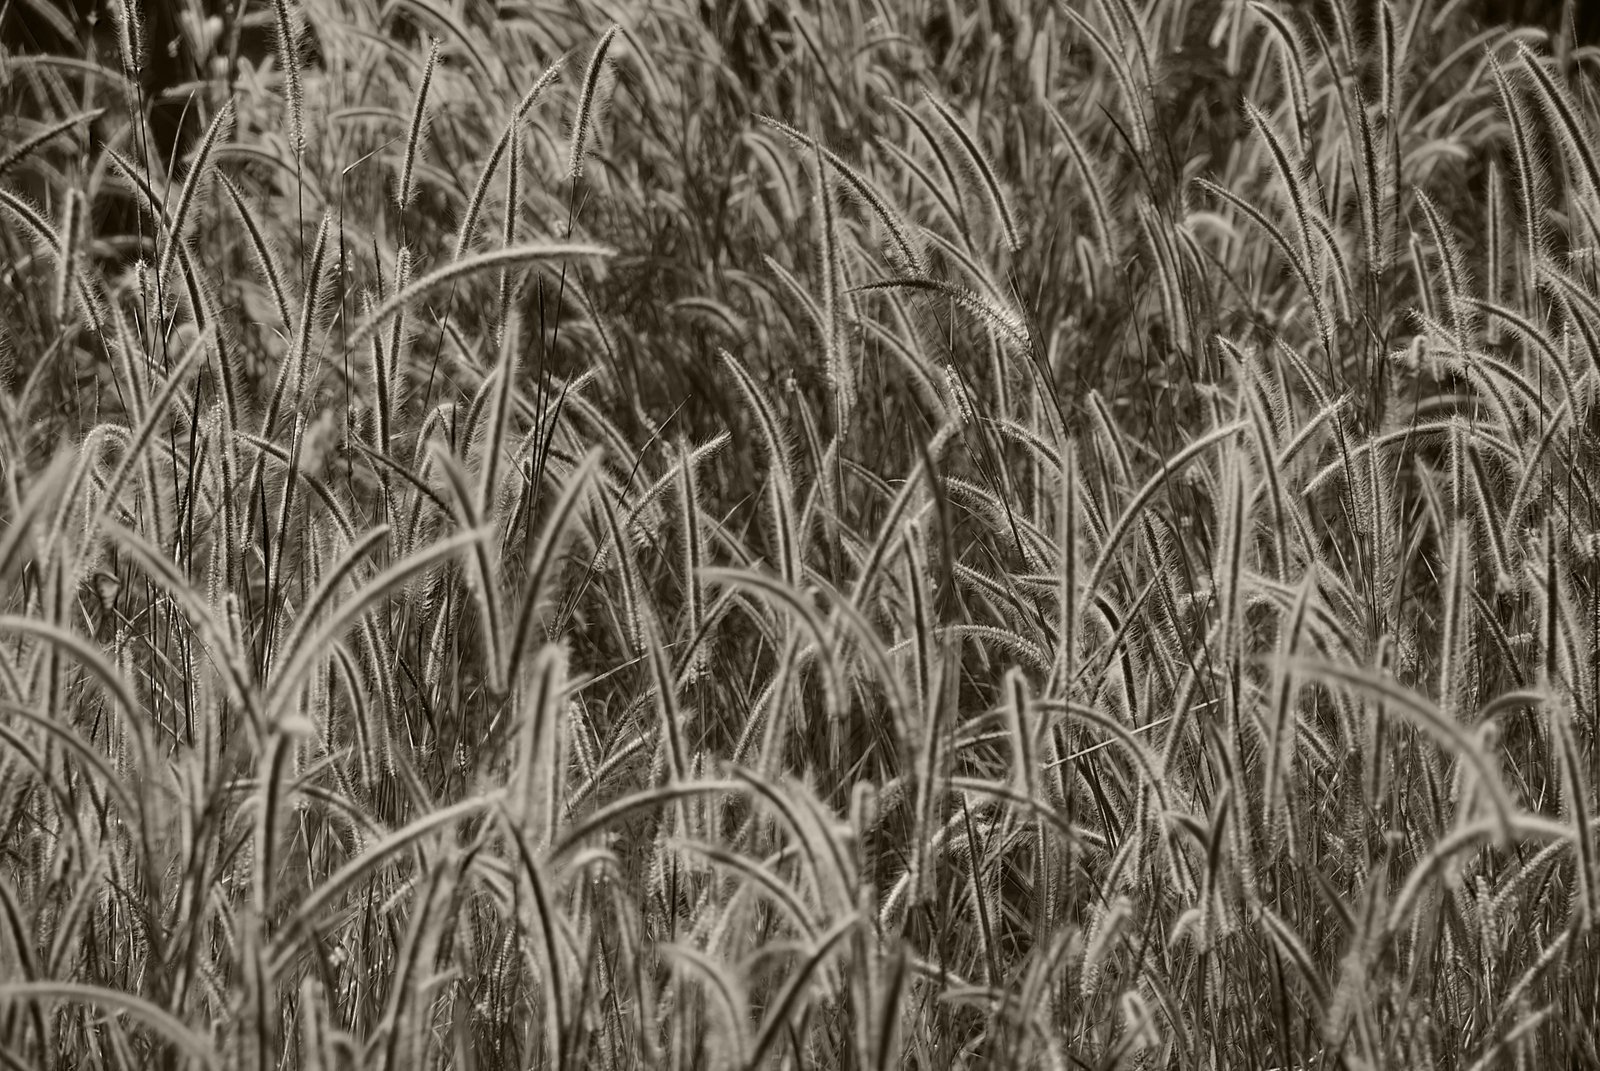 an image of grass in the wild during the daytime